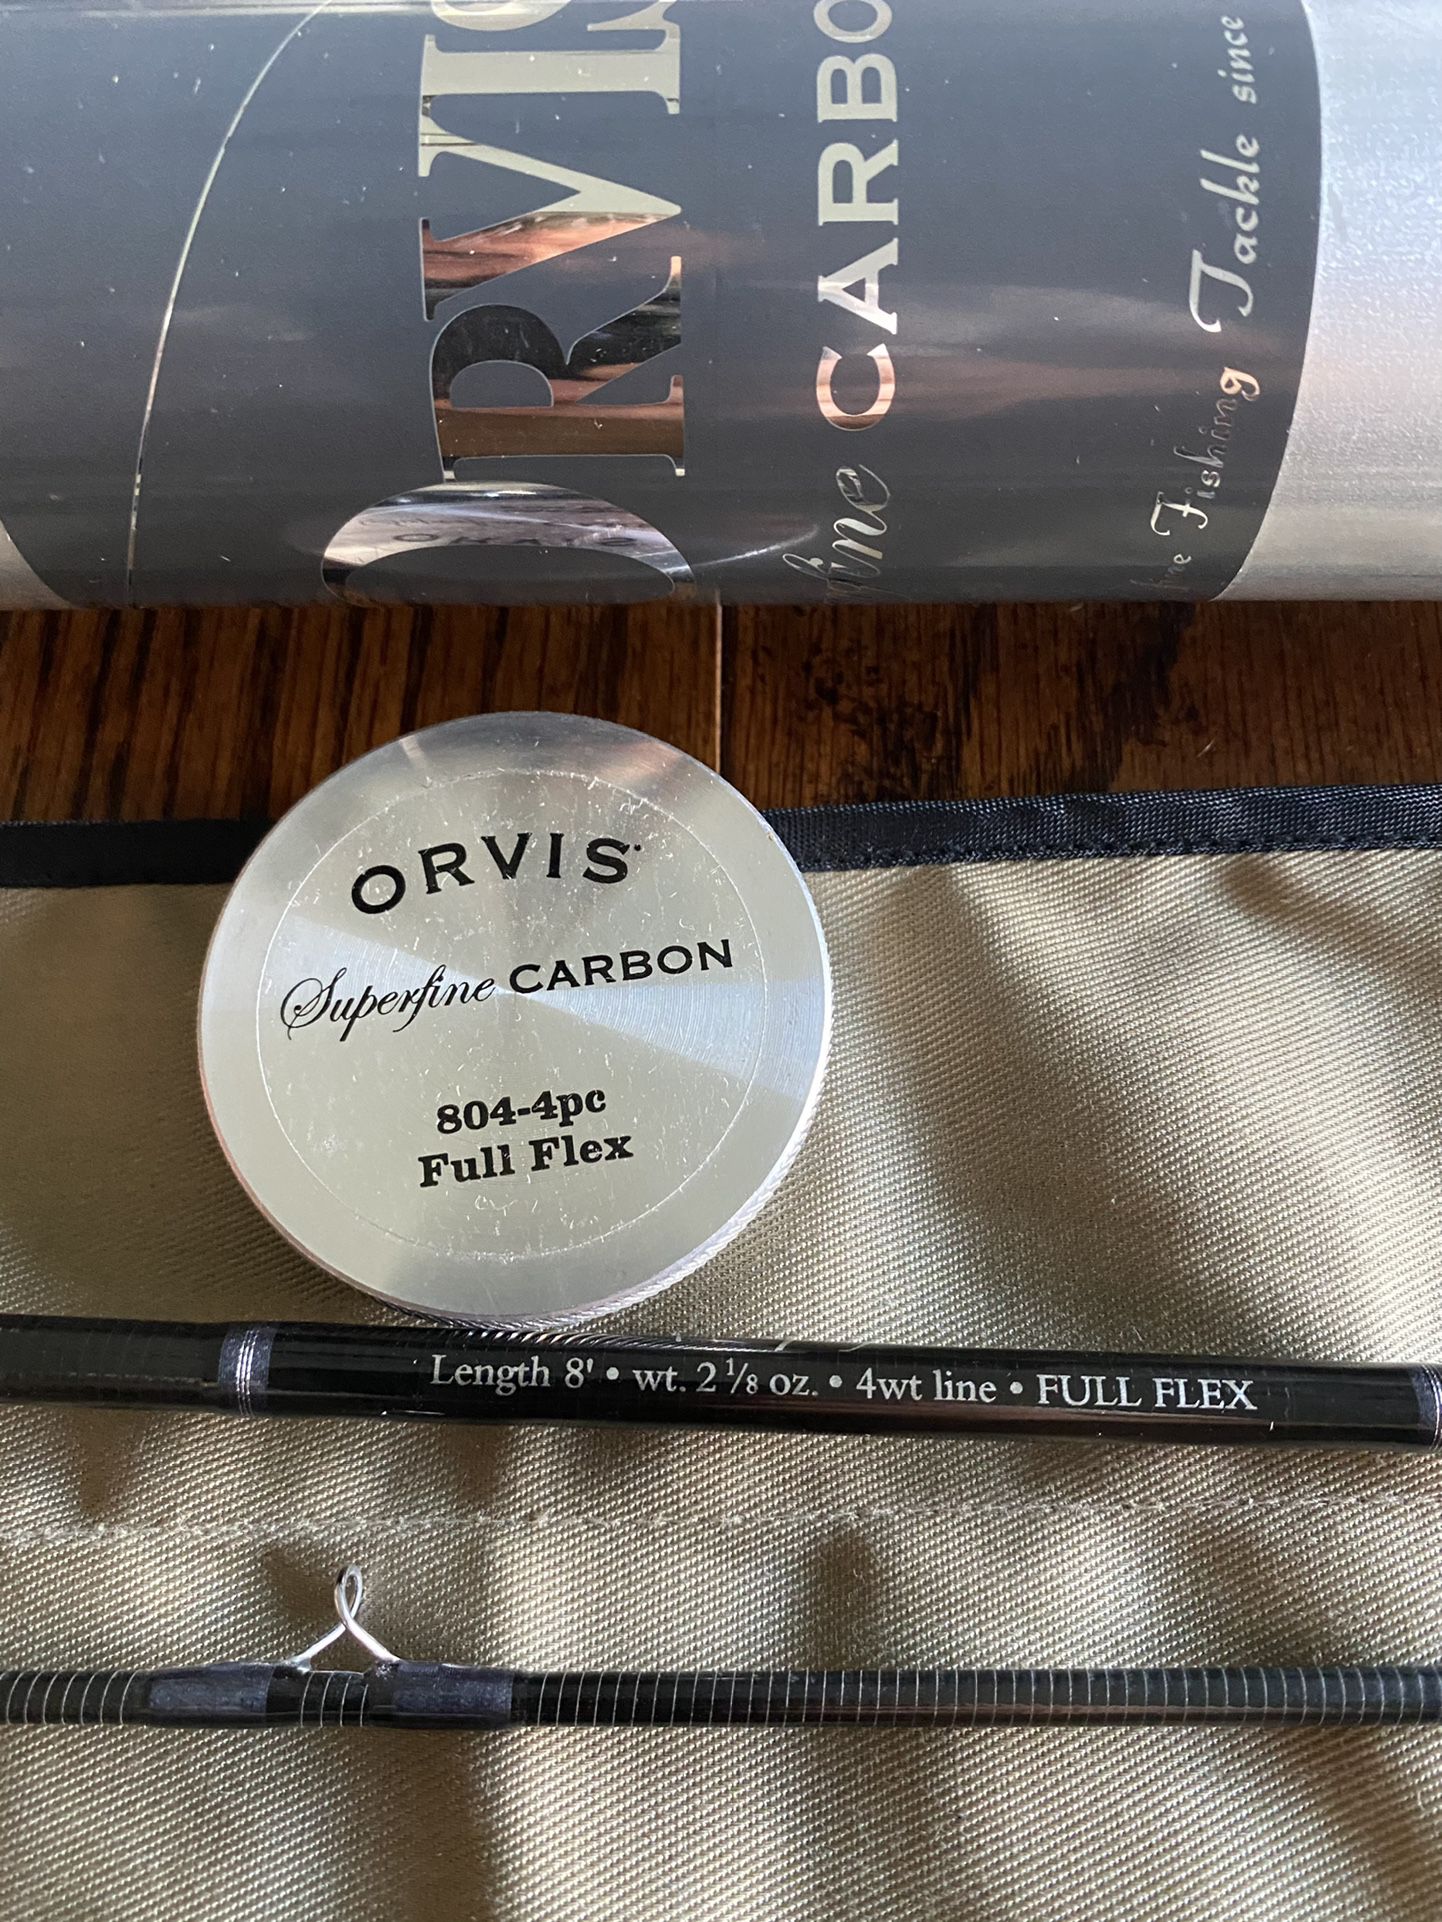 Orvis Superfine Carbon Fly Fishing Rod for Sale in Upland, CA